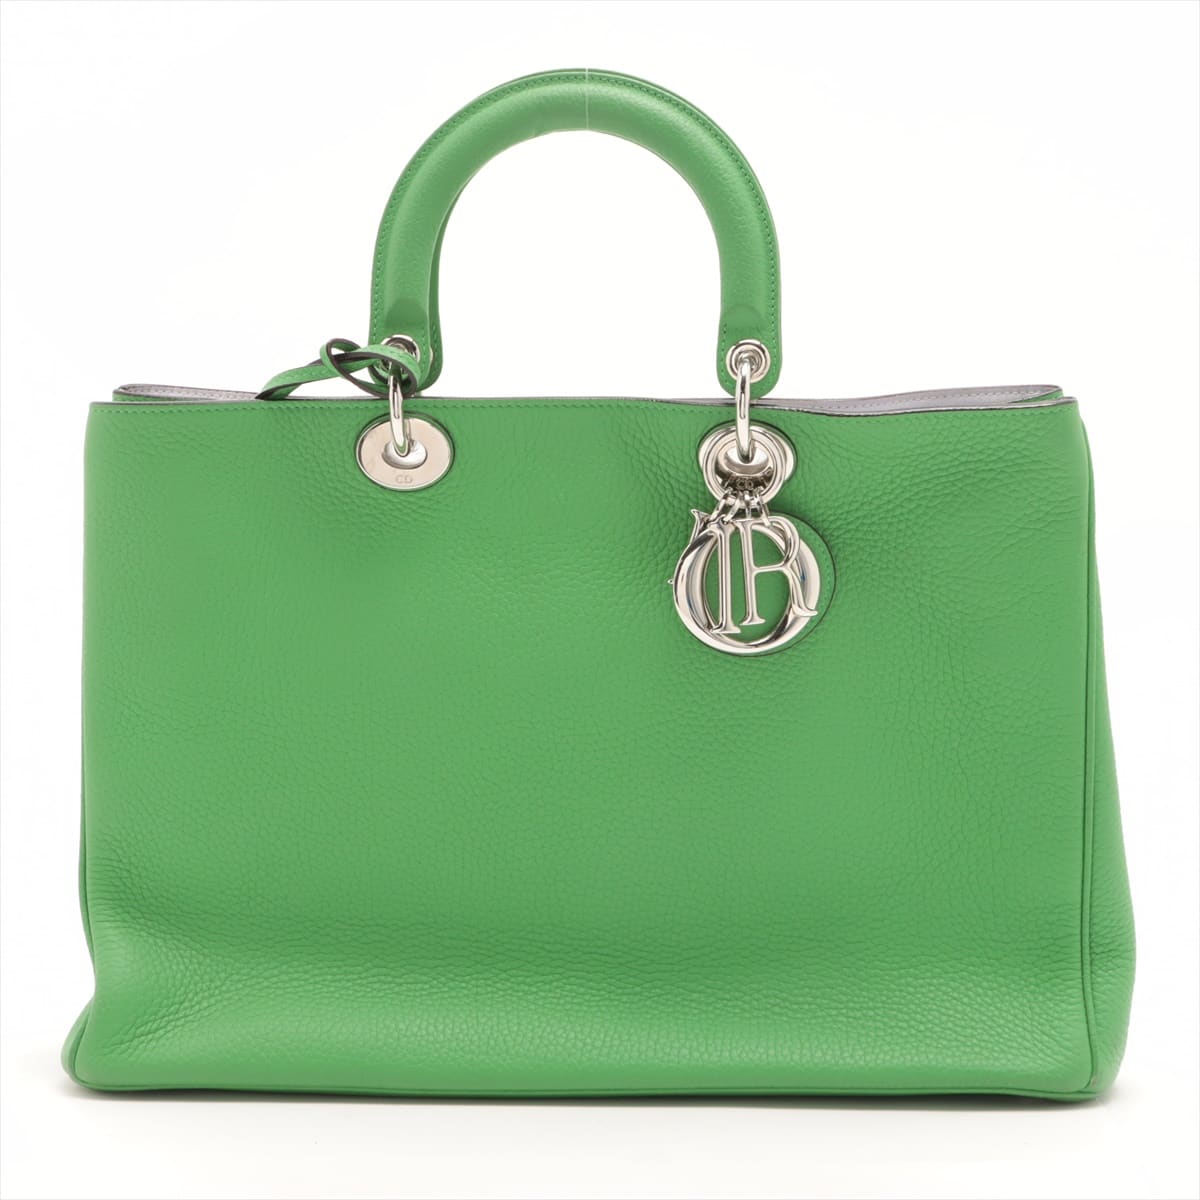 Christian Dior Diorissimo Leather 2way handbag Green with pouch